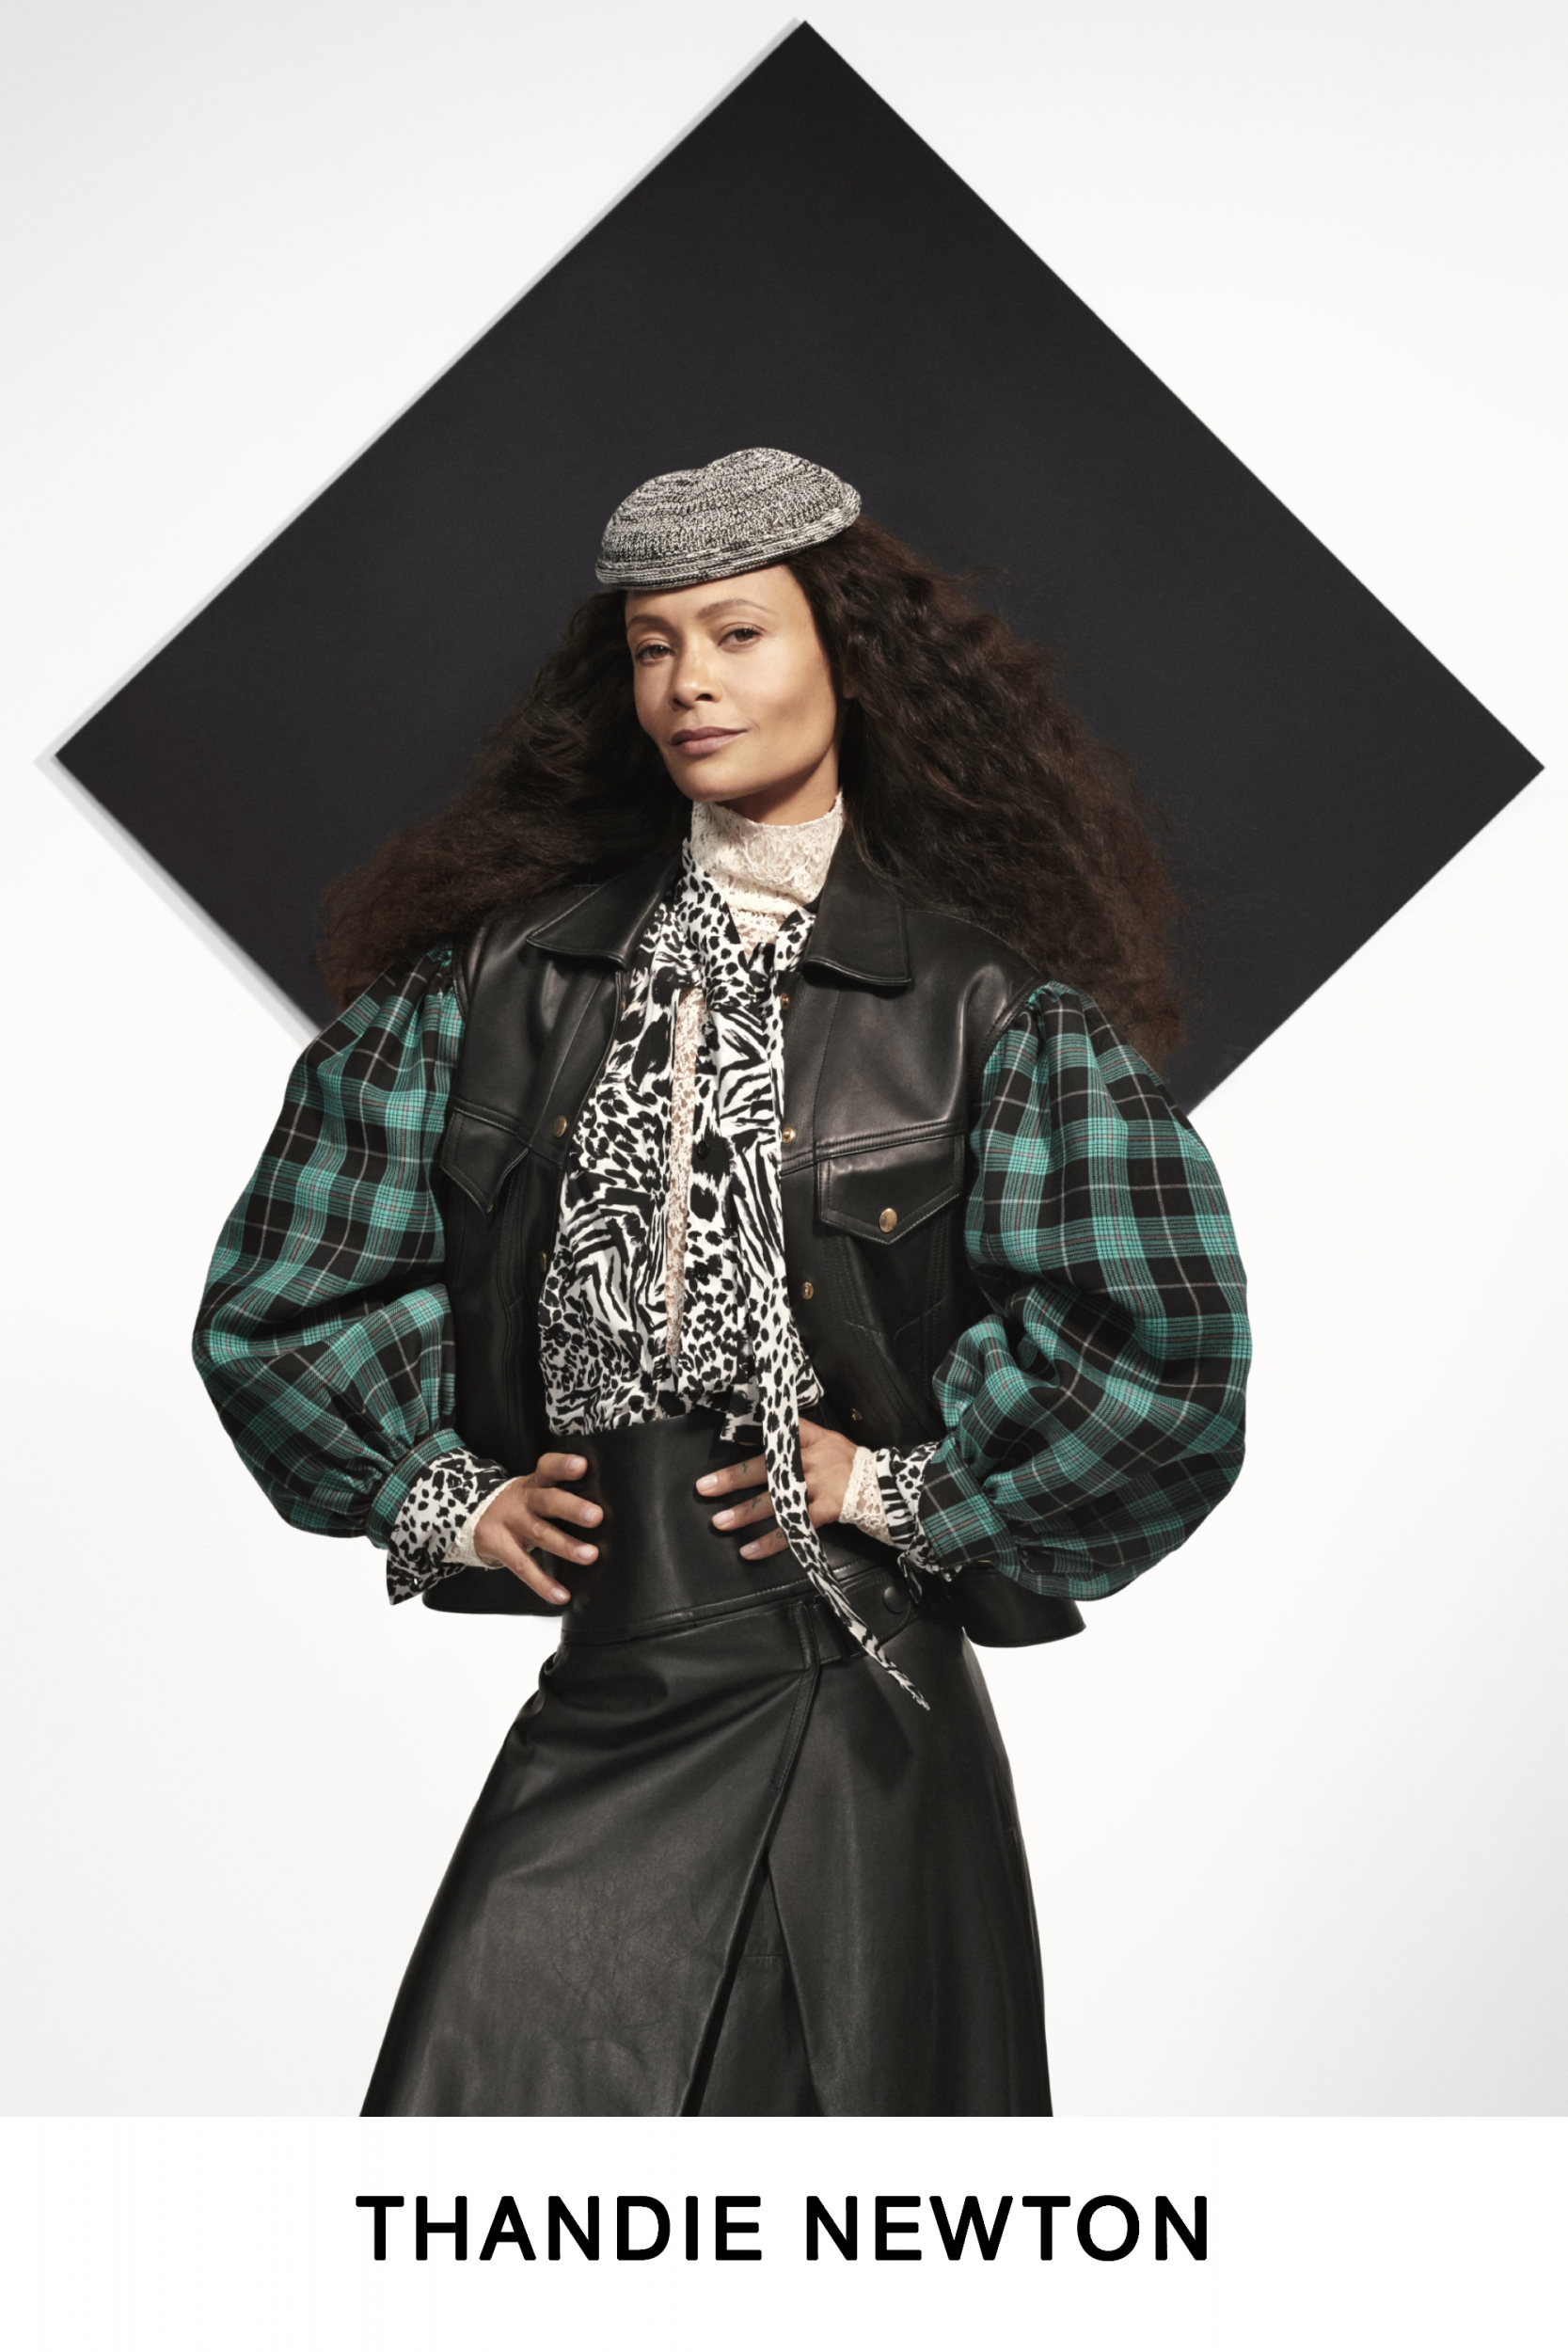 Louis Vuitton Tapped Indya Moore, Chloë Grace Moretz and 15 Other Celebs  for Their New Campaign